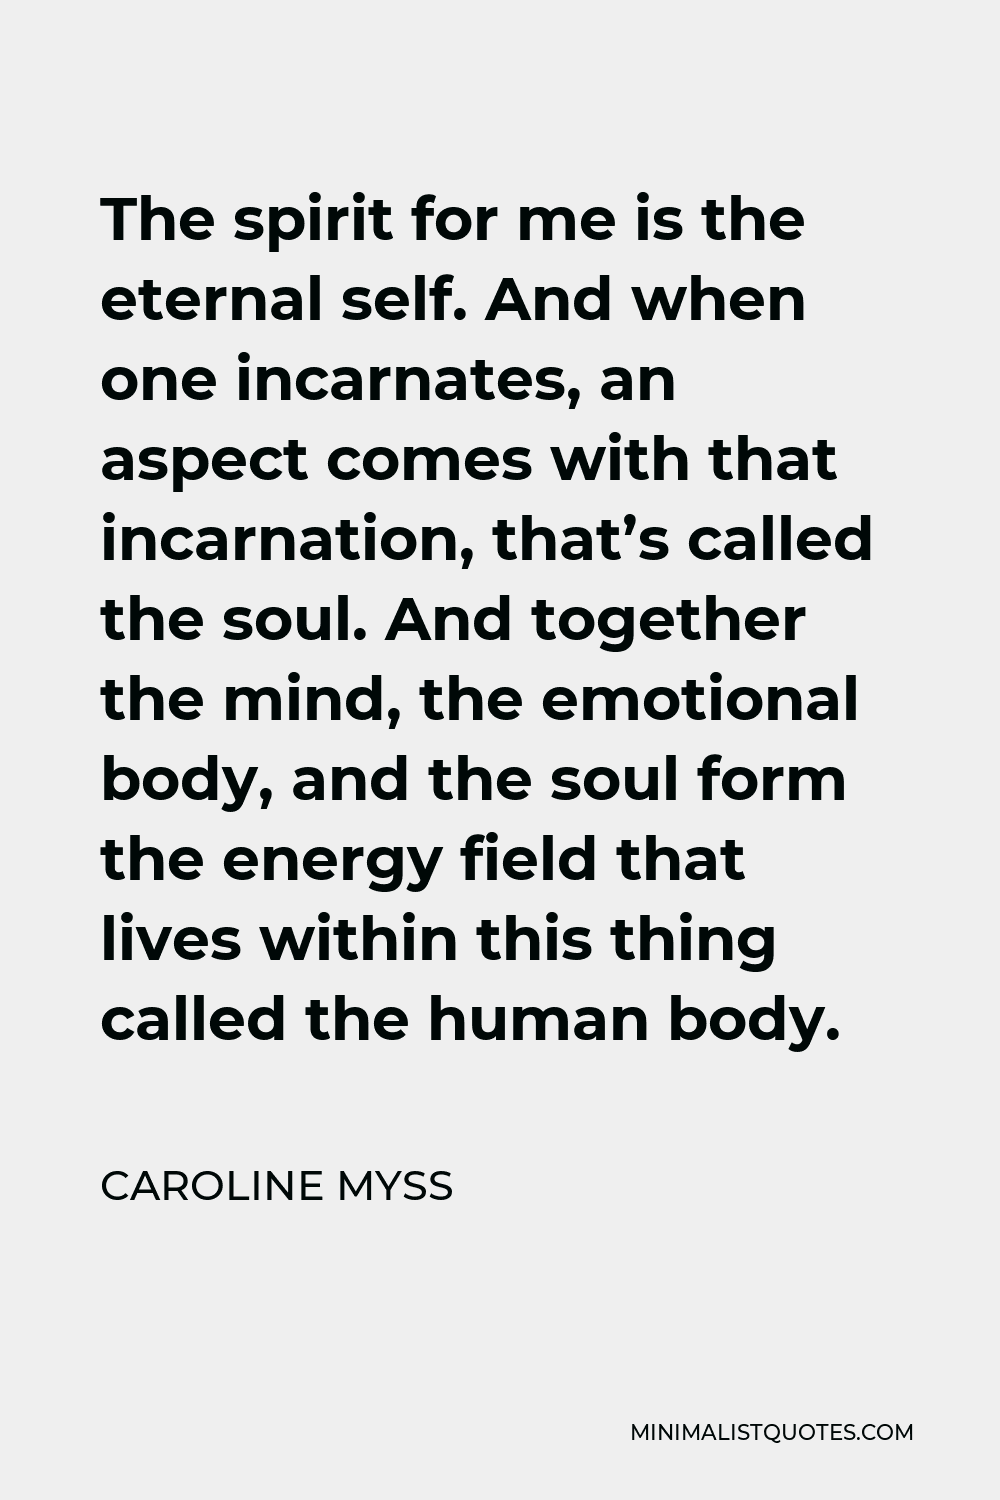 Caroline Myss Quote - The spirit for me is the eternal self. And when one incarnates, an aspect comes with that incarnation, that’s called the soul. And together the mind, the emotional body, and the soul form the energy field that lives within this thing called the human body.